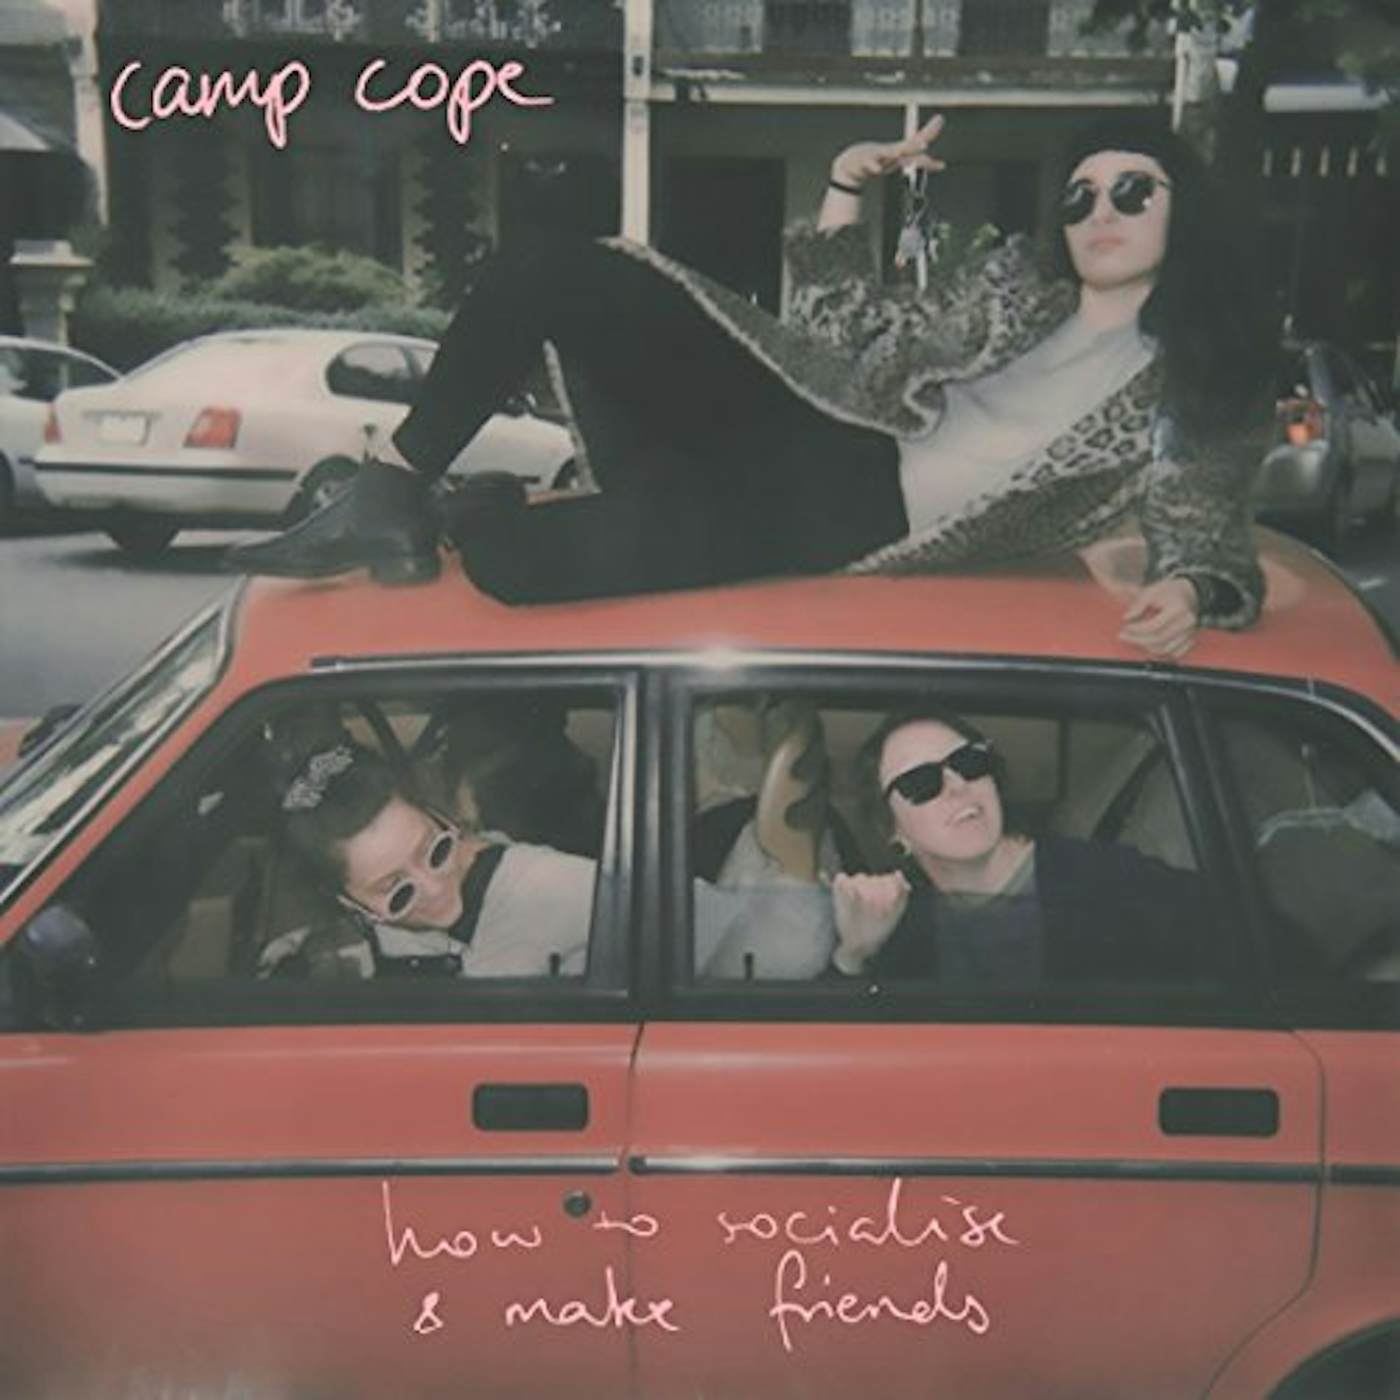 Camp Cope How to Socialise & Make Friends Vinyl Record